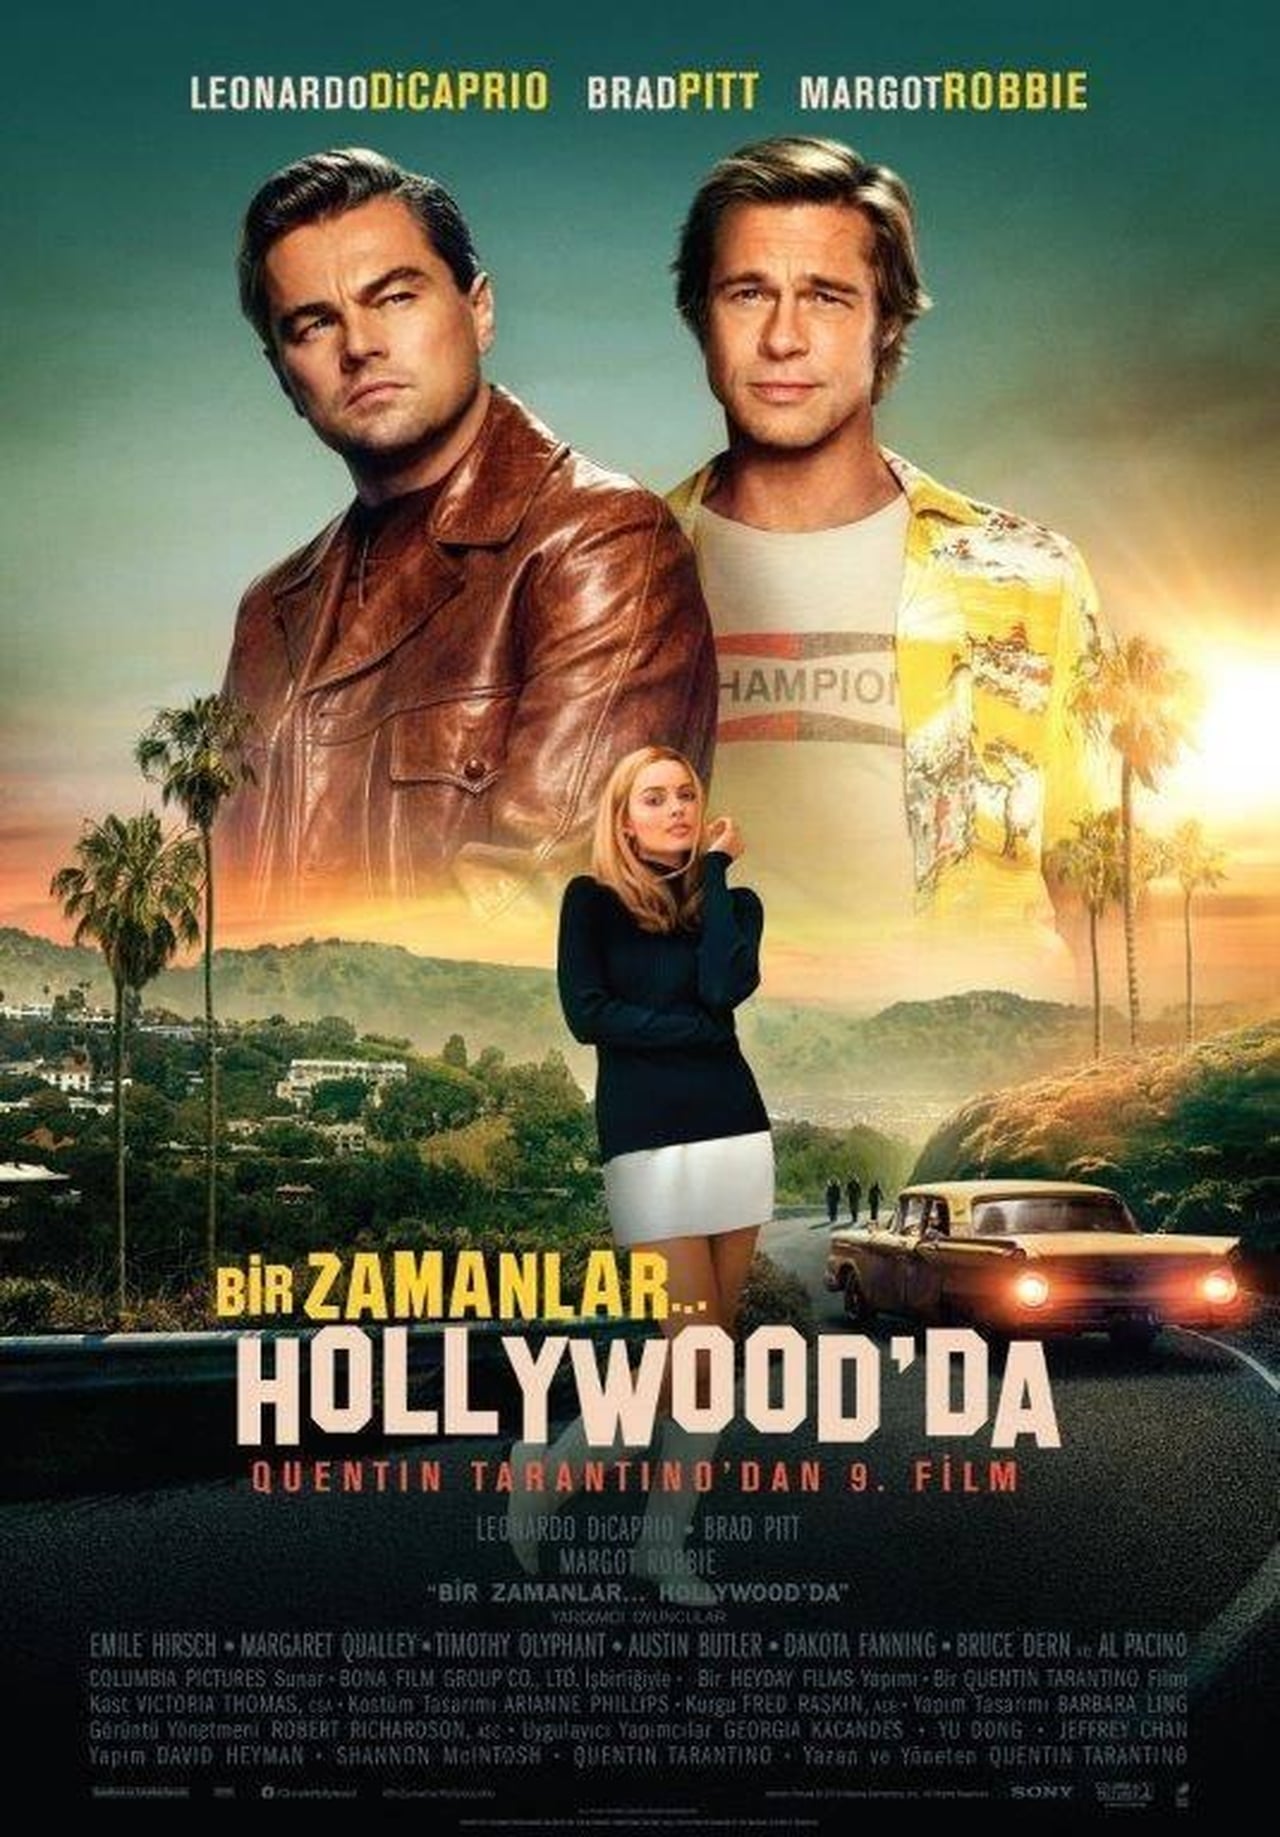 Once Upon a Time in Hollywood (2019) 640Kbps 23.976Fps 48Khz 5.1Ch DD+ NF E-AC3 Turkish Audio TAC